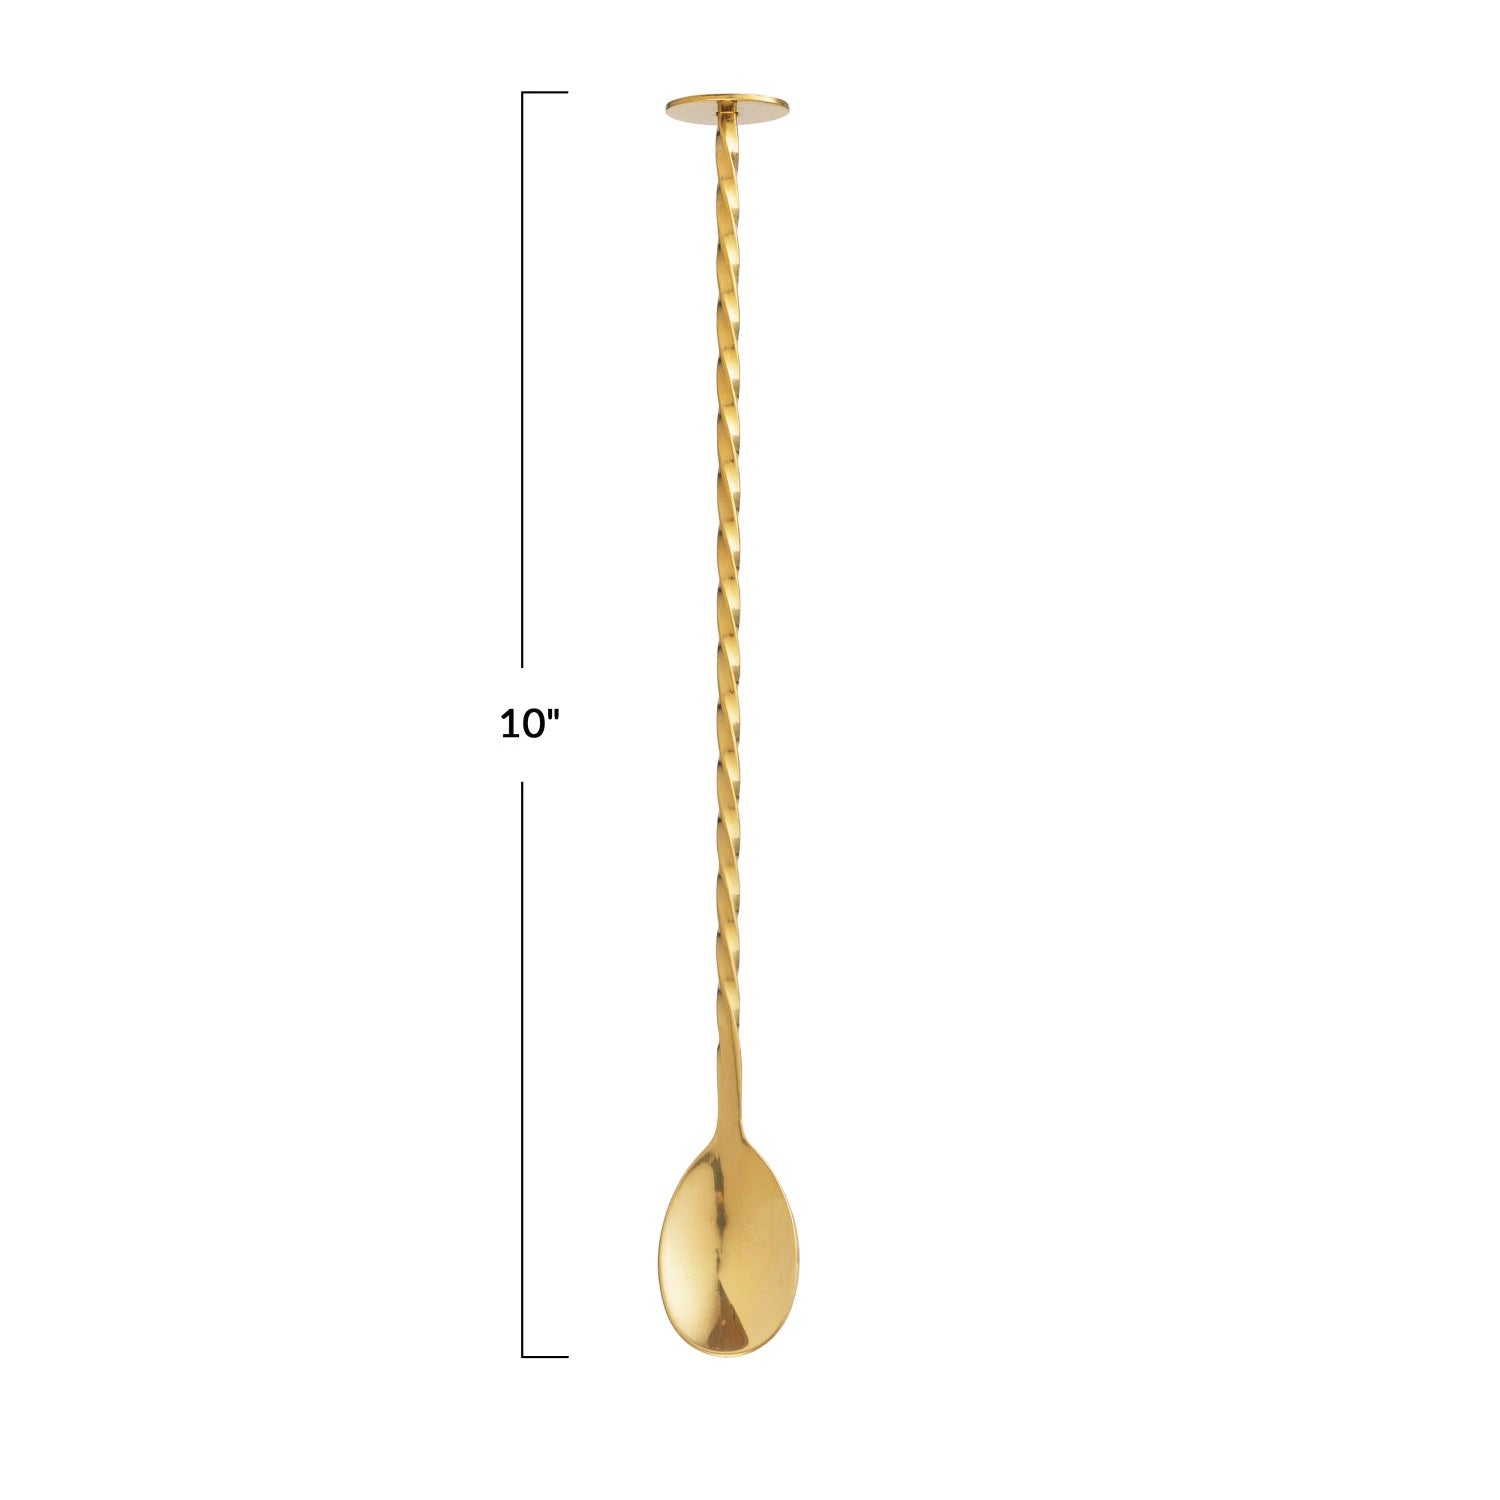 10" Cocktail Spoon - Gold